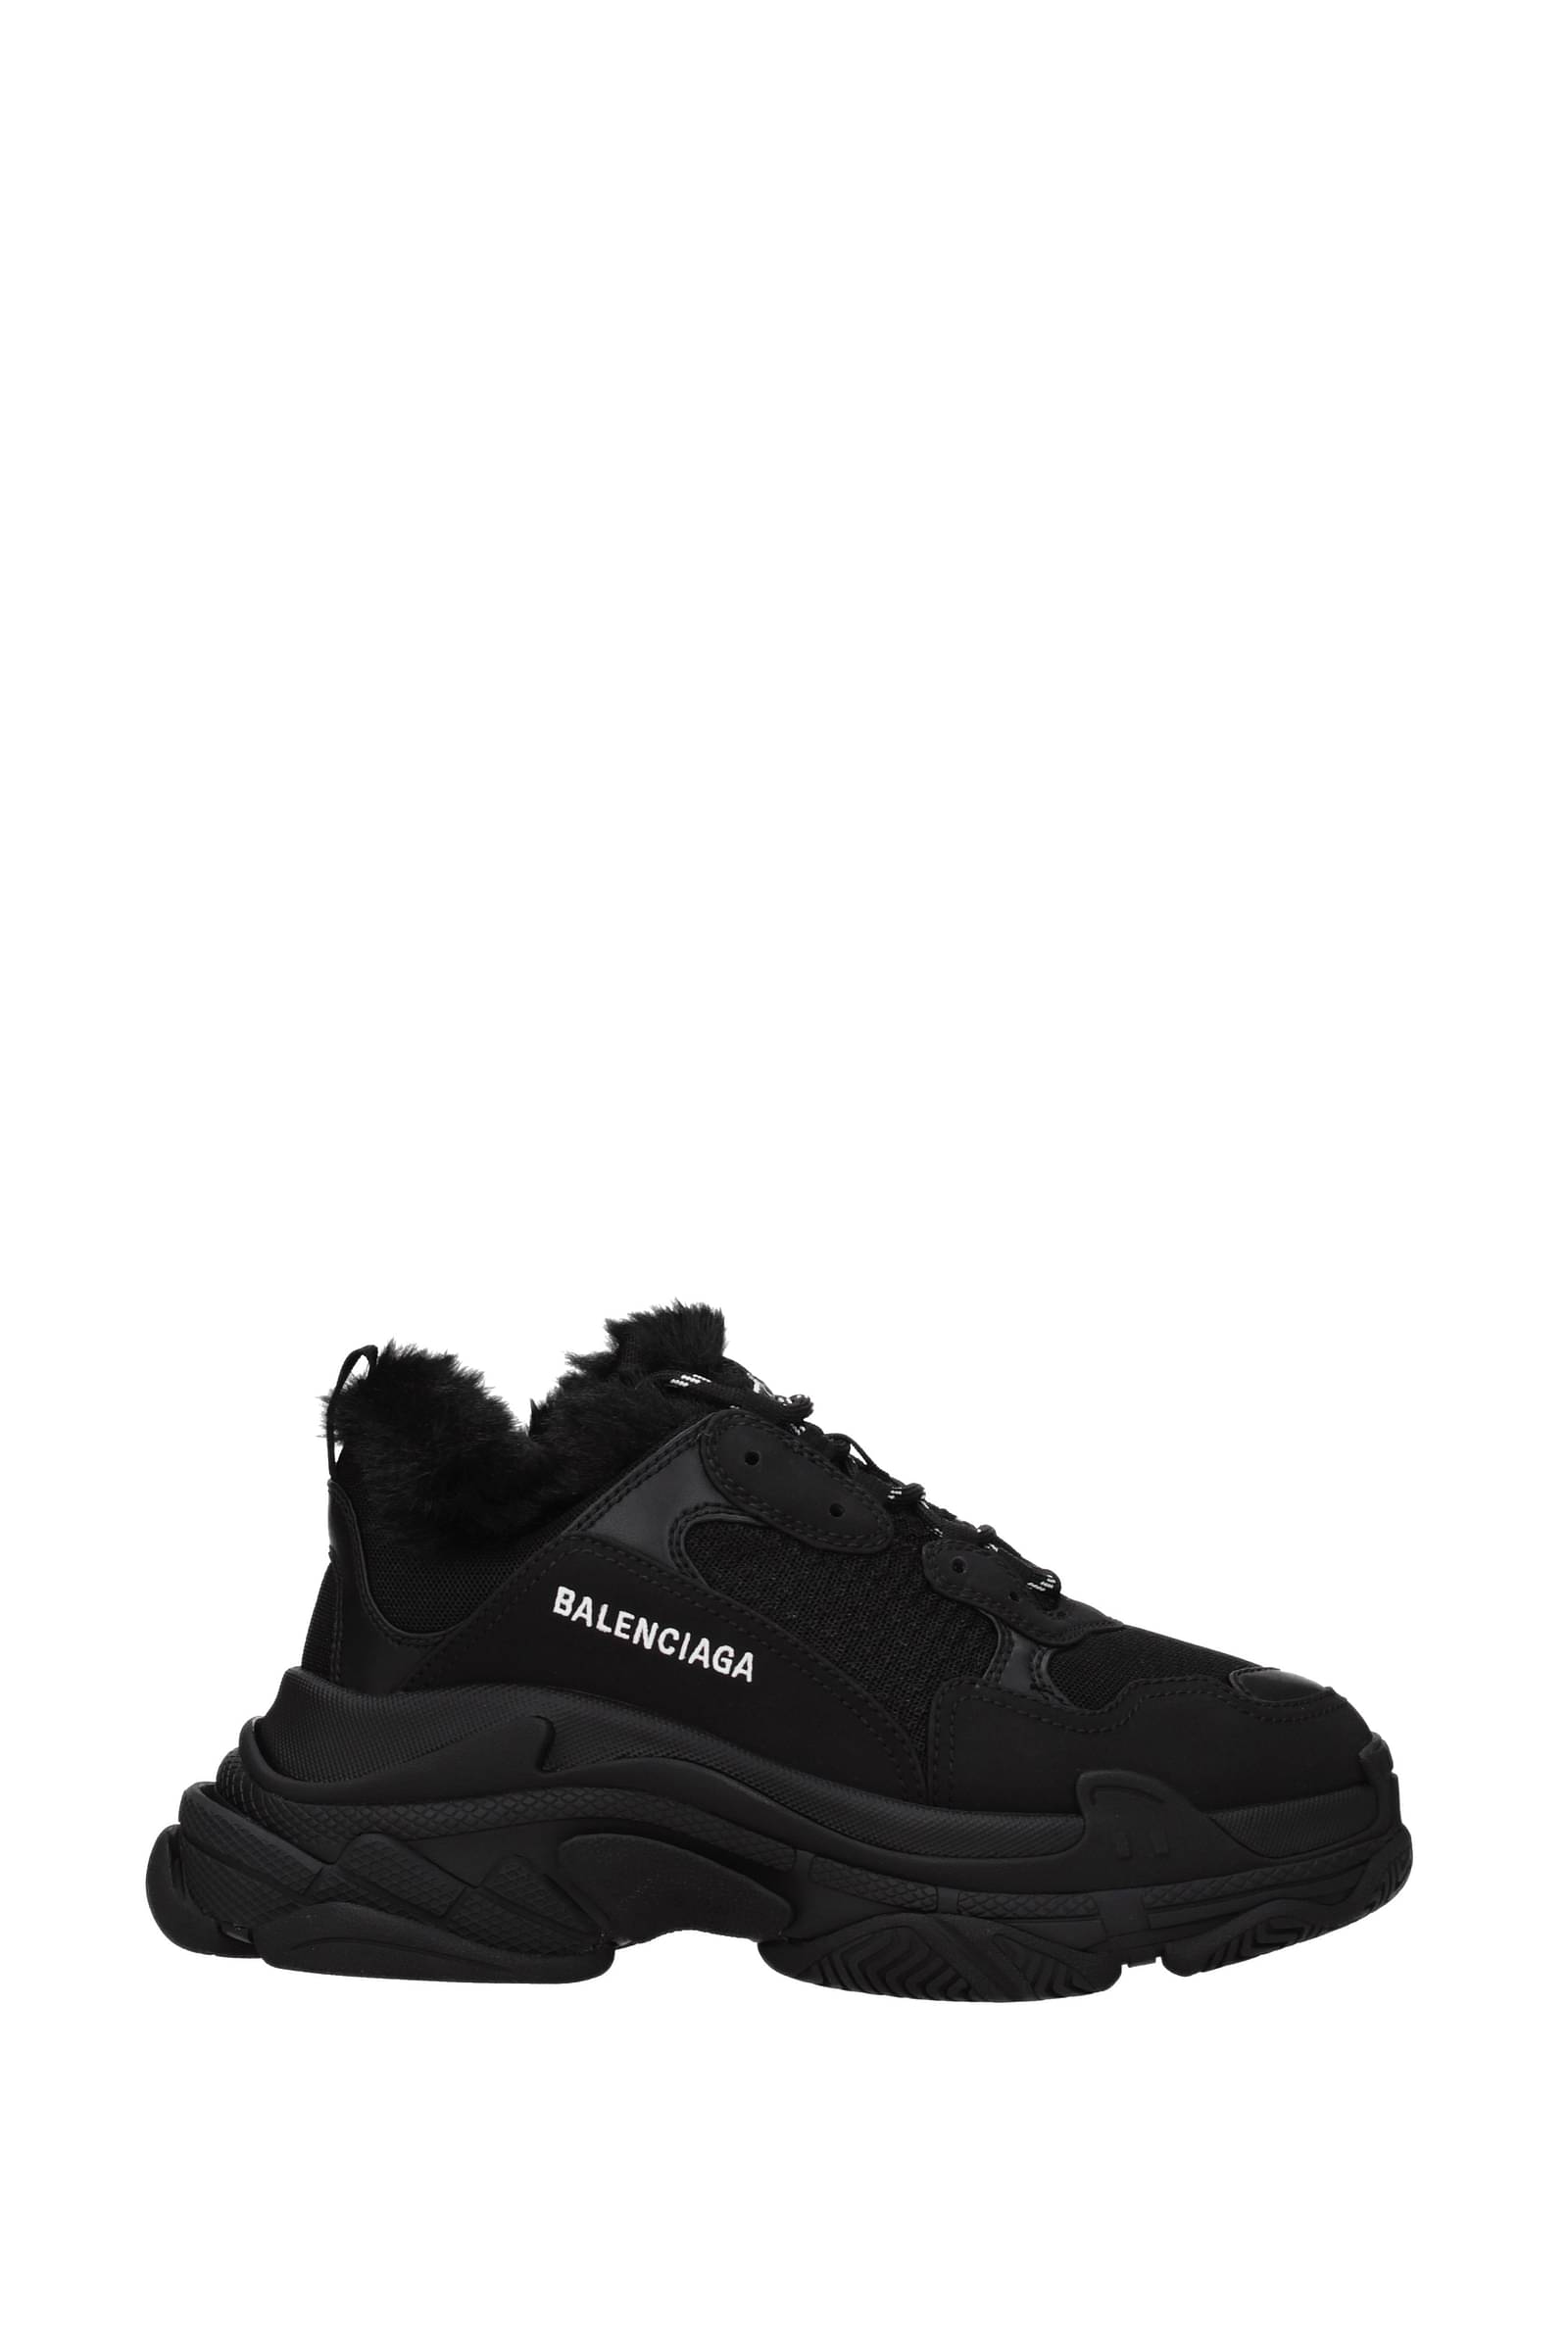 Balenciagas AllNew Track2 Sneaker Is Available Now  Balenciaga track 2 Sneakers  men fashion Balenciaga shoes mens